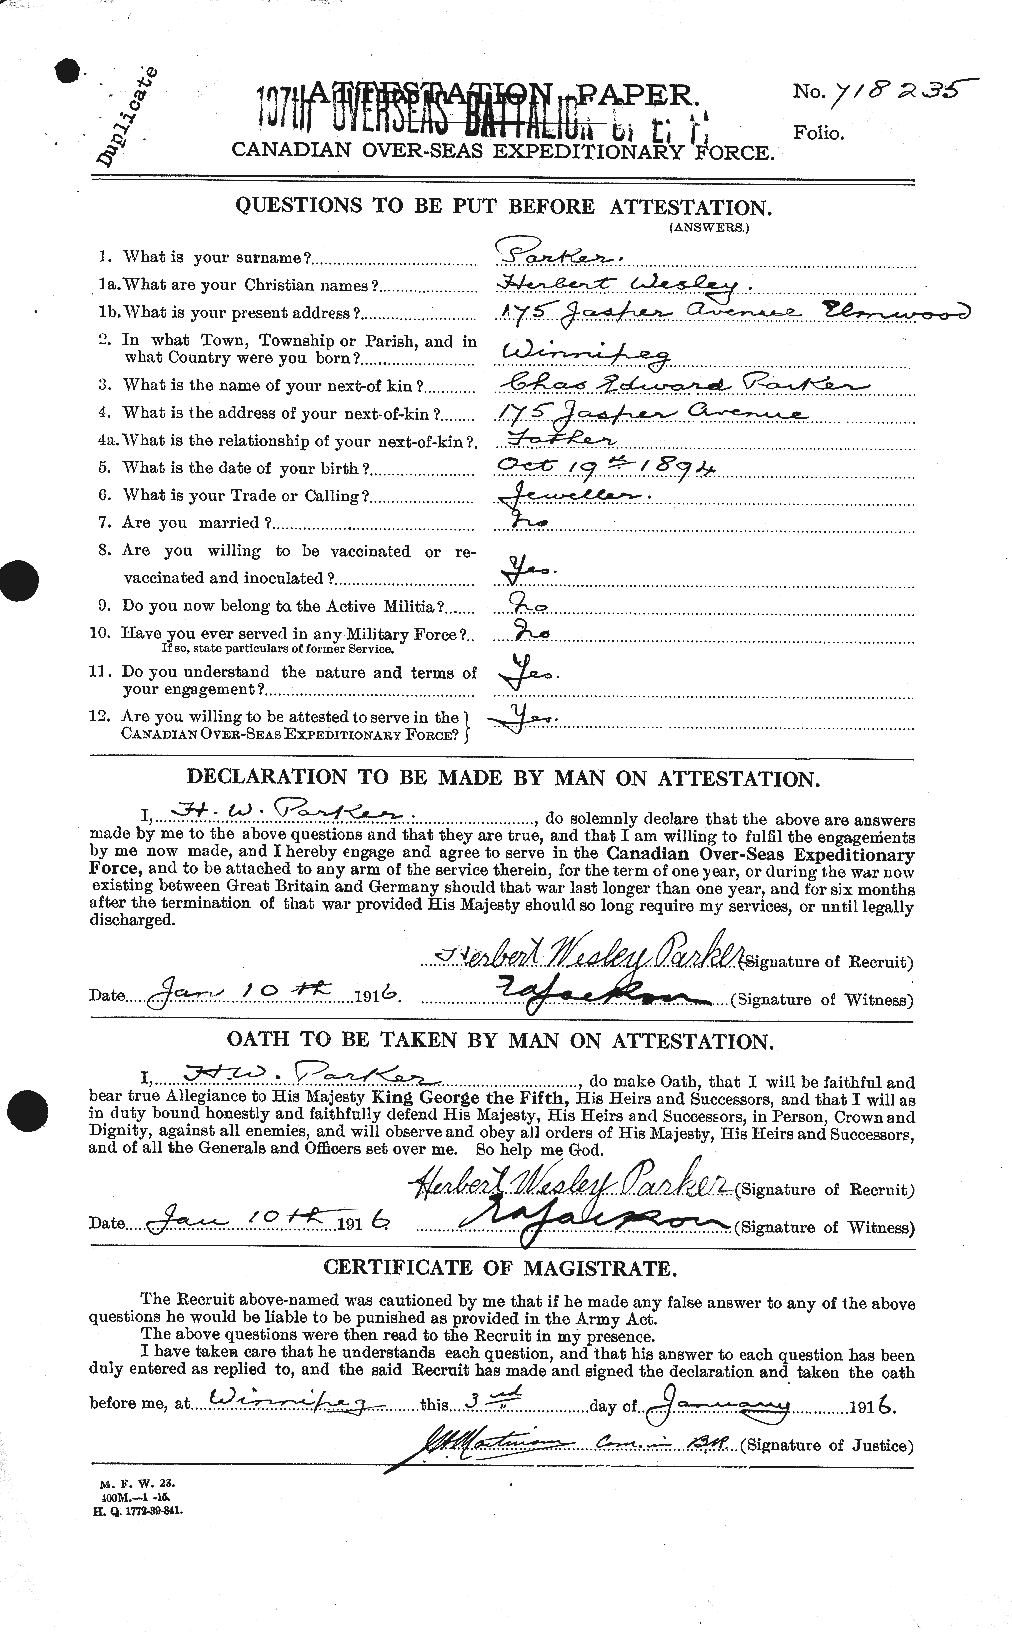 Personnel Records of the First World War - CEF 565373a